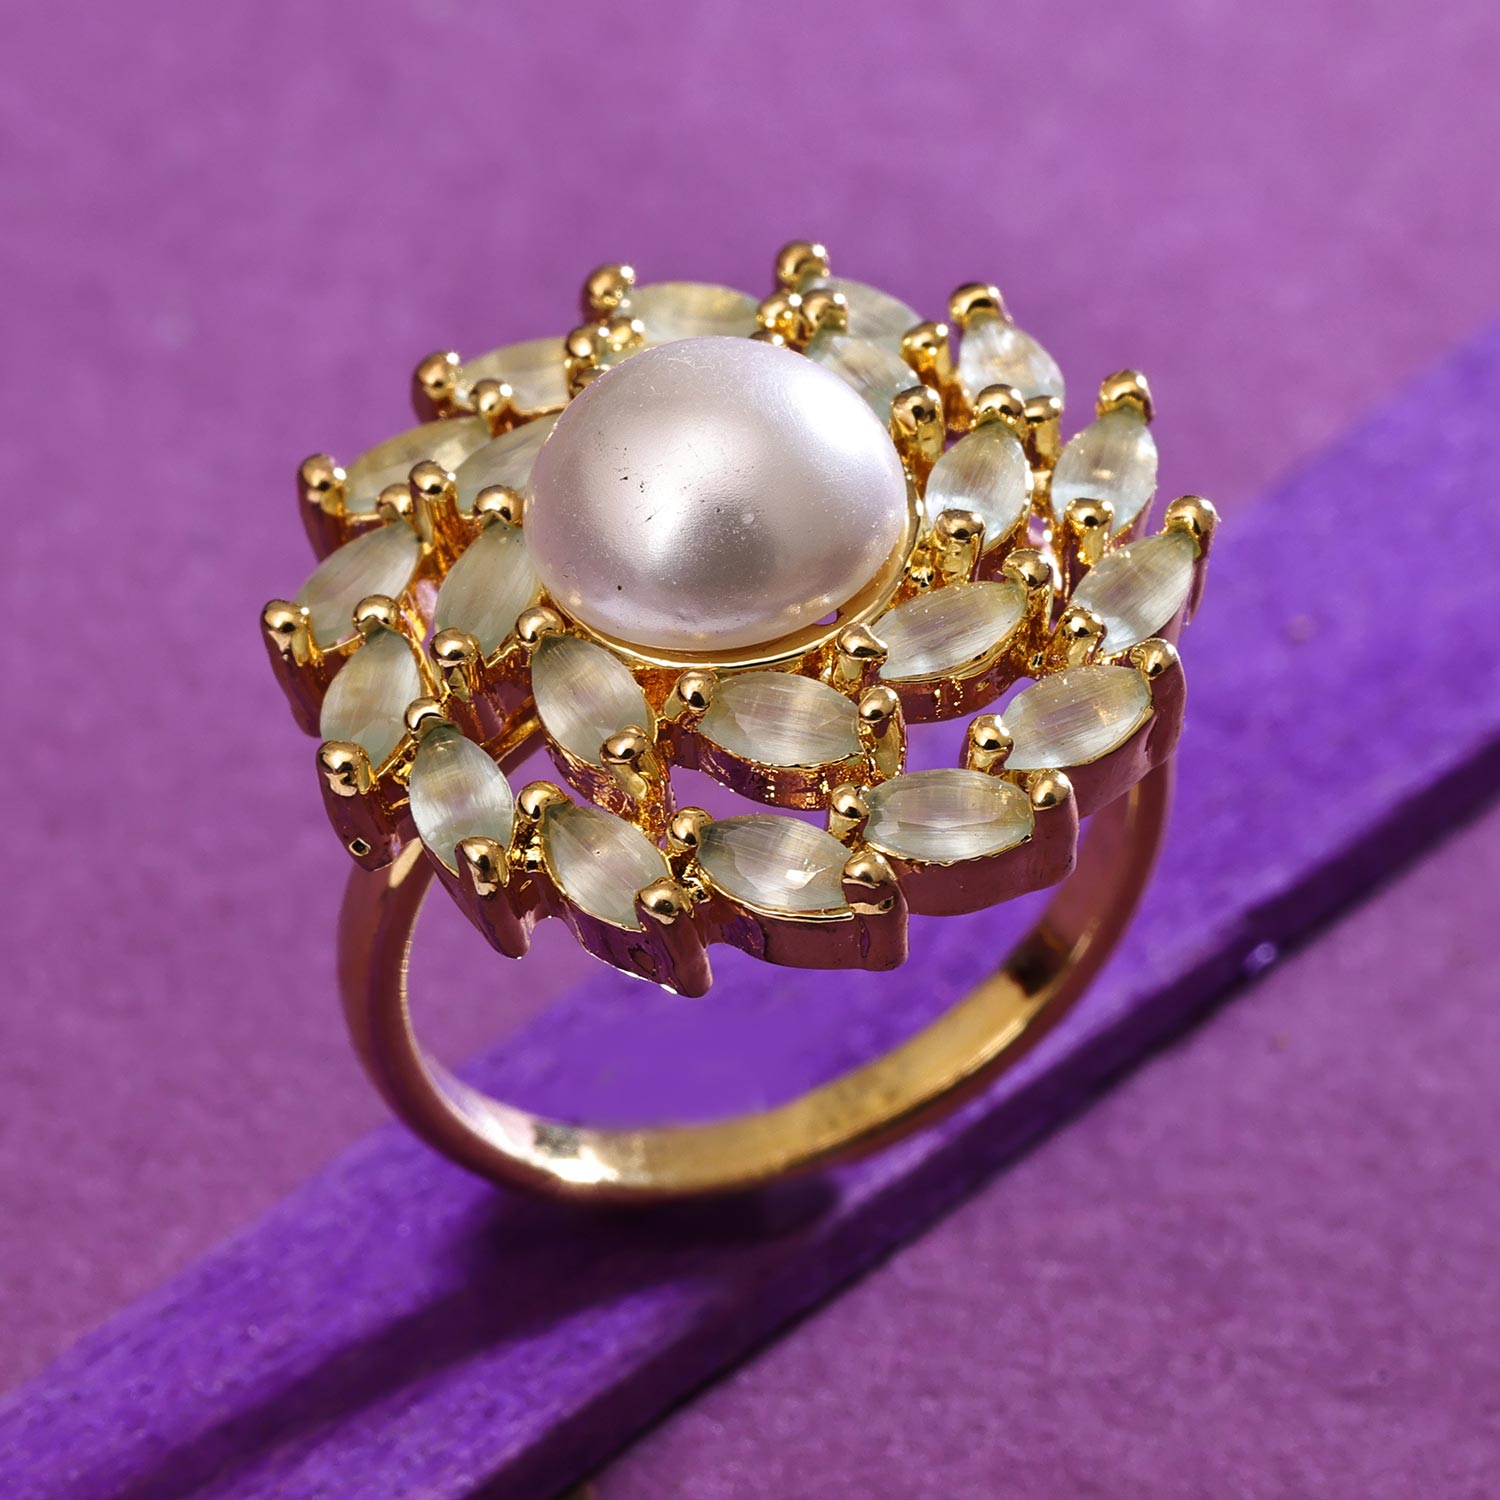 Simple Pearl Ring Design||pearl Gold Rings Designs - YouTube